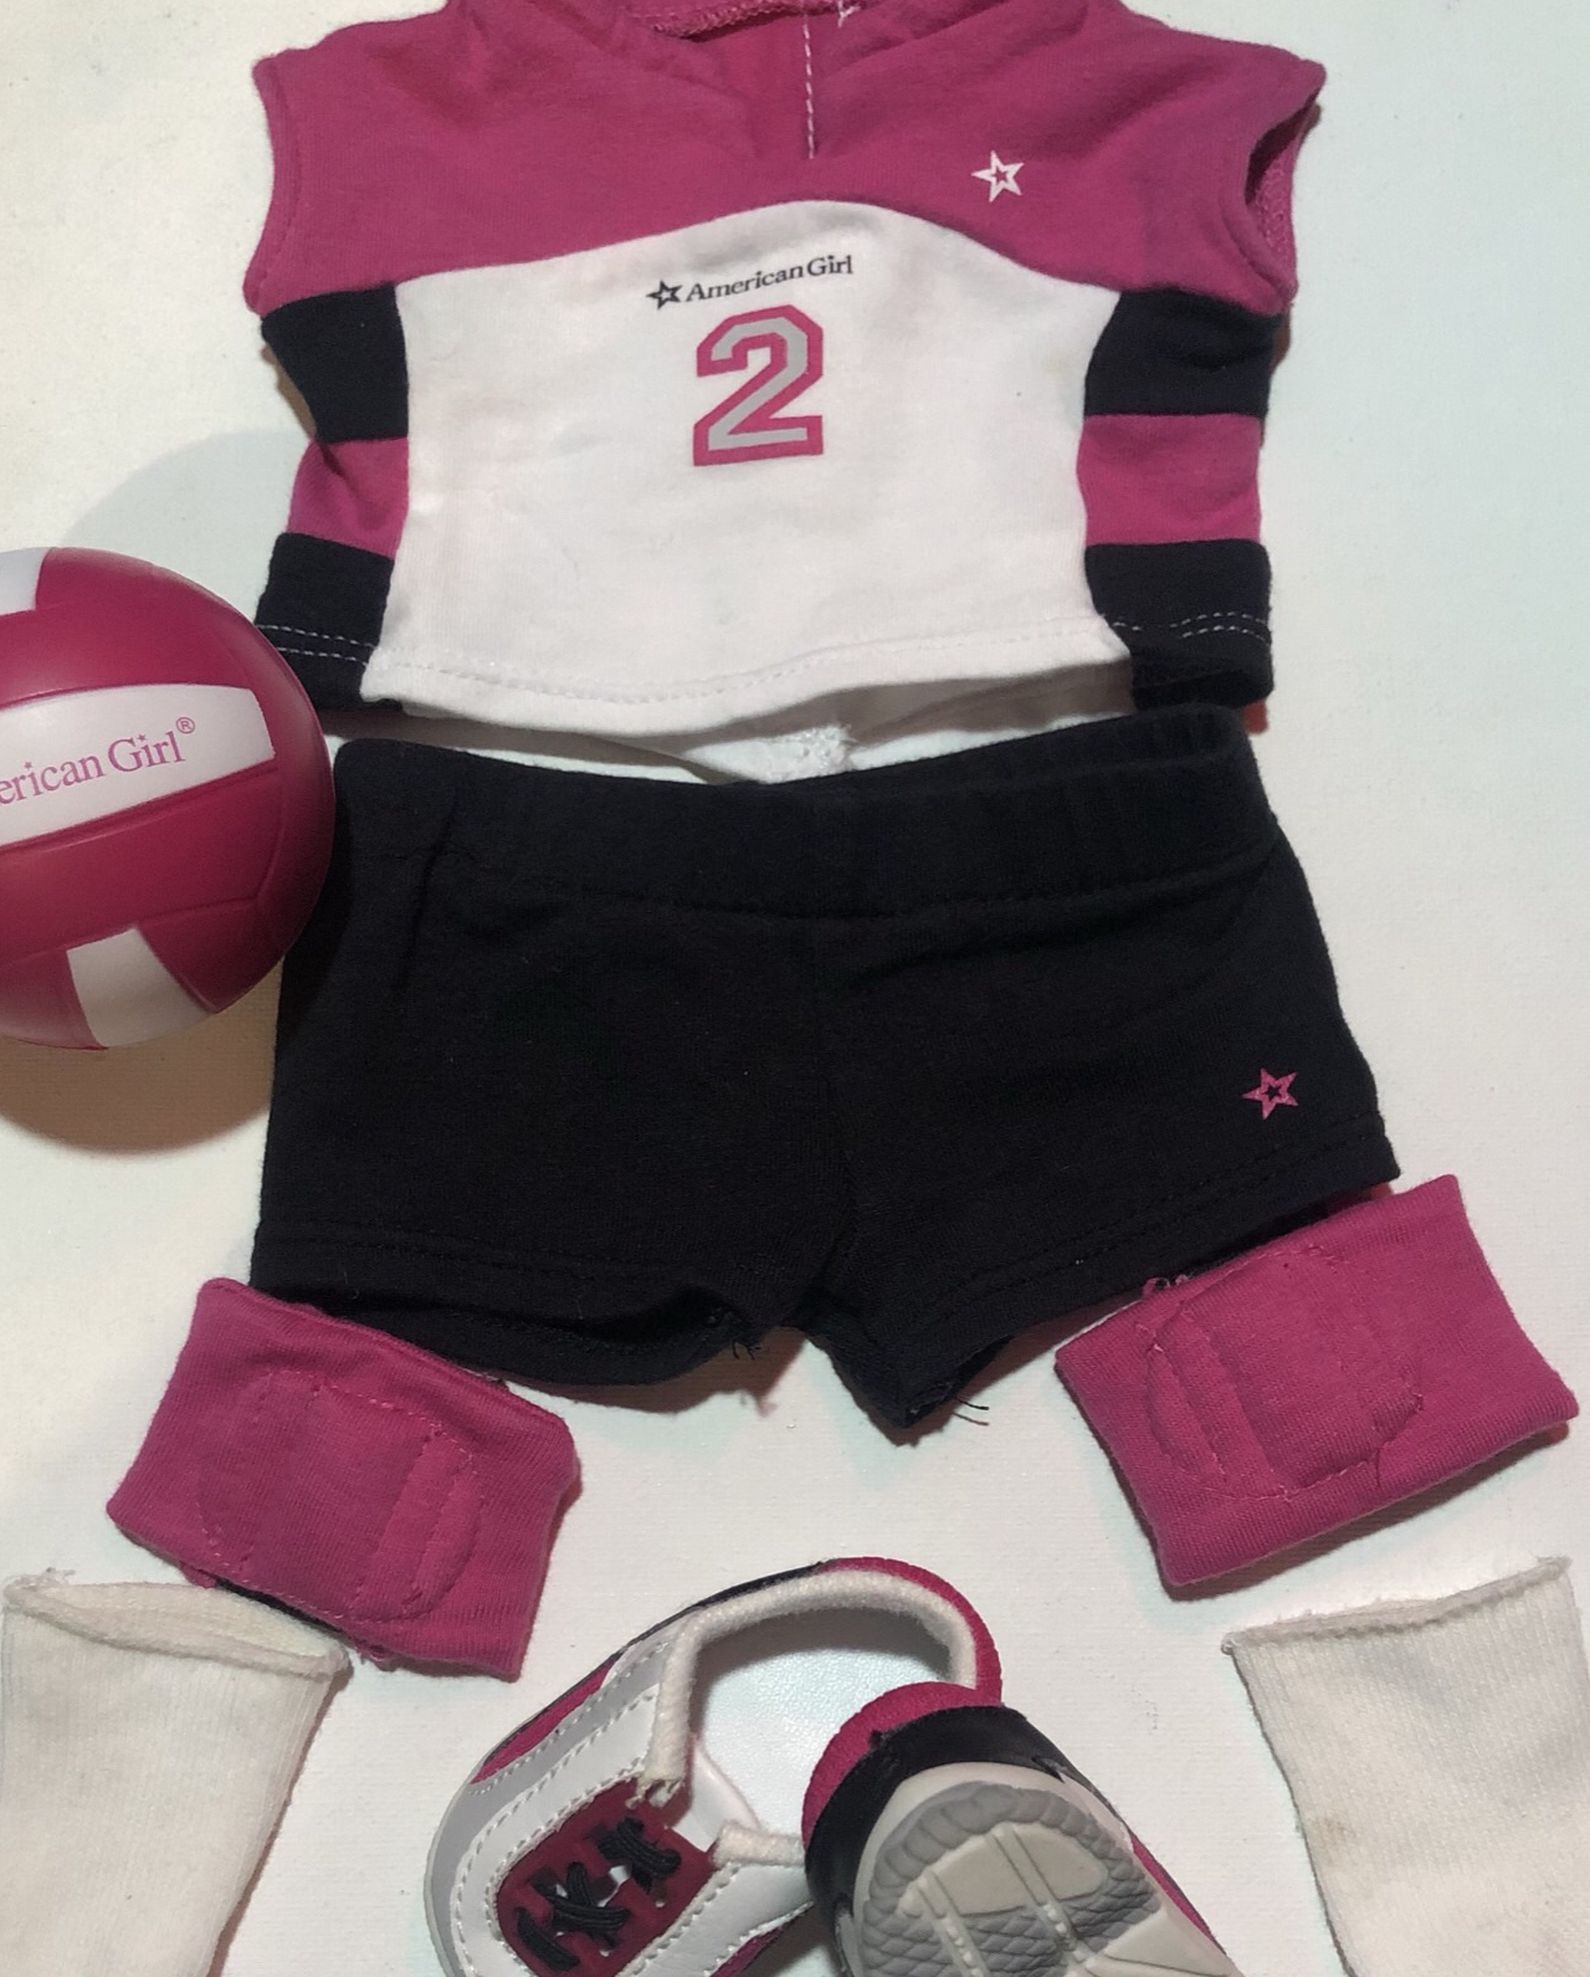 American Girl Doll Clothes (Volleyball Outfit)